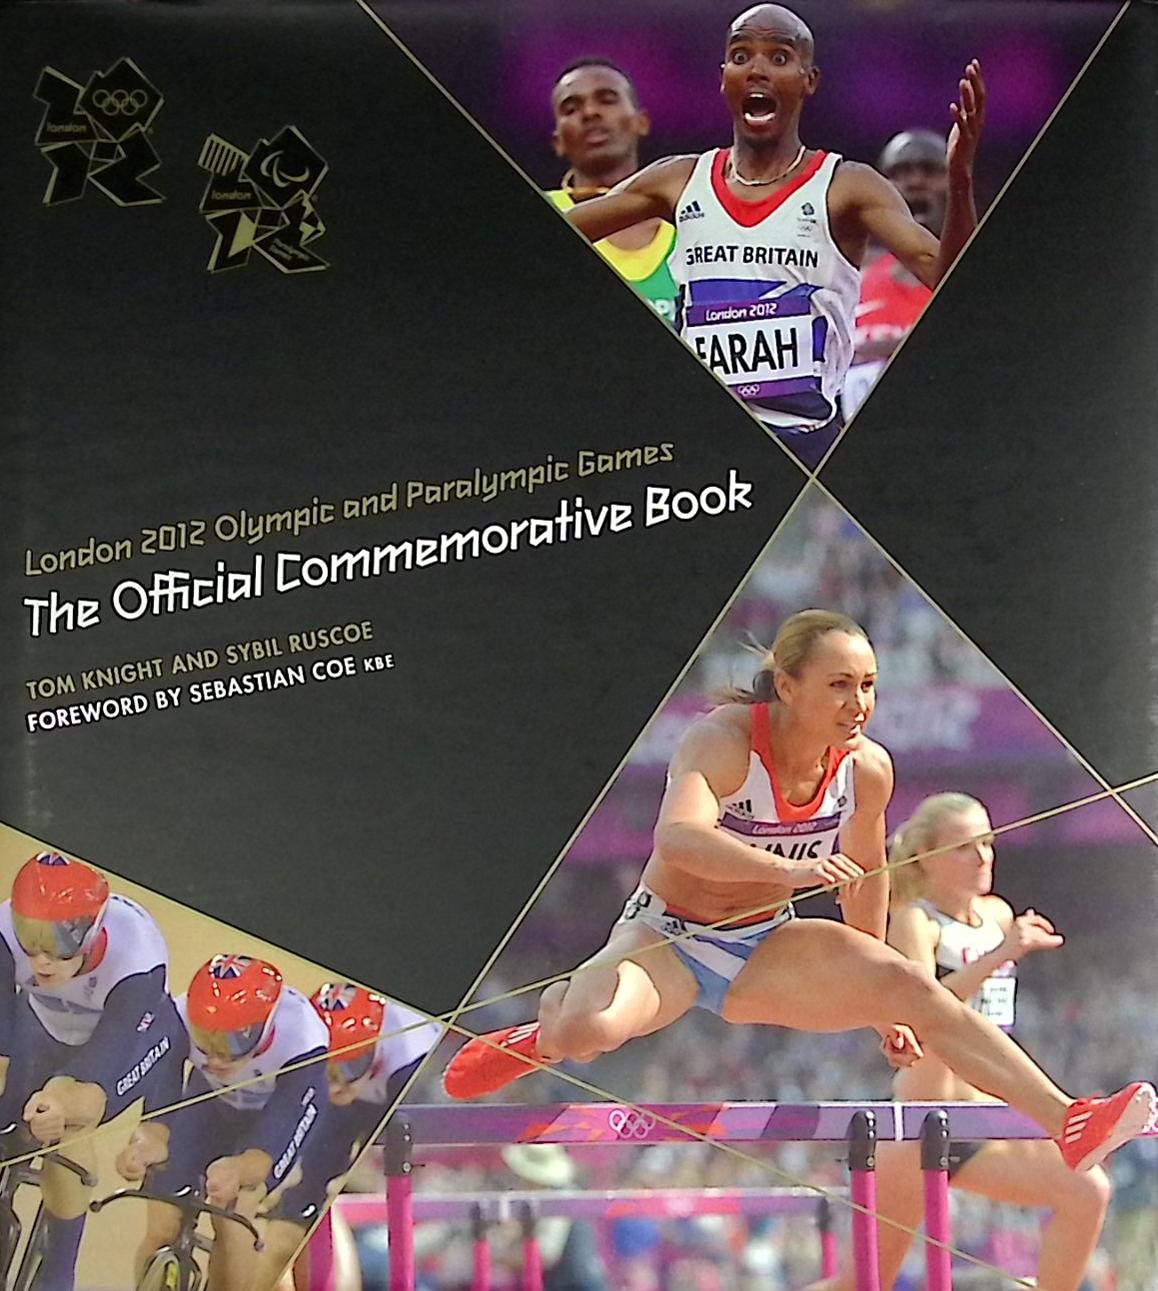 The Games. Britain's Olympic and Paralympic Journey to London 2012 + The Official Commemorative Book. Limited Edition Collector's Box Set.